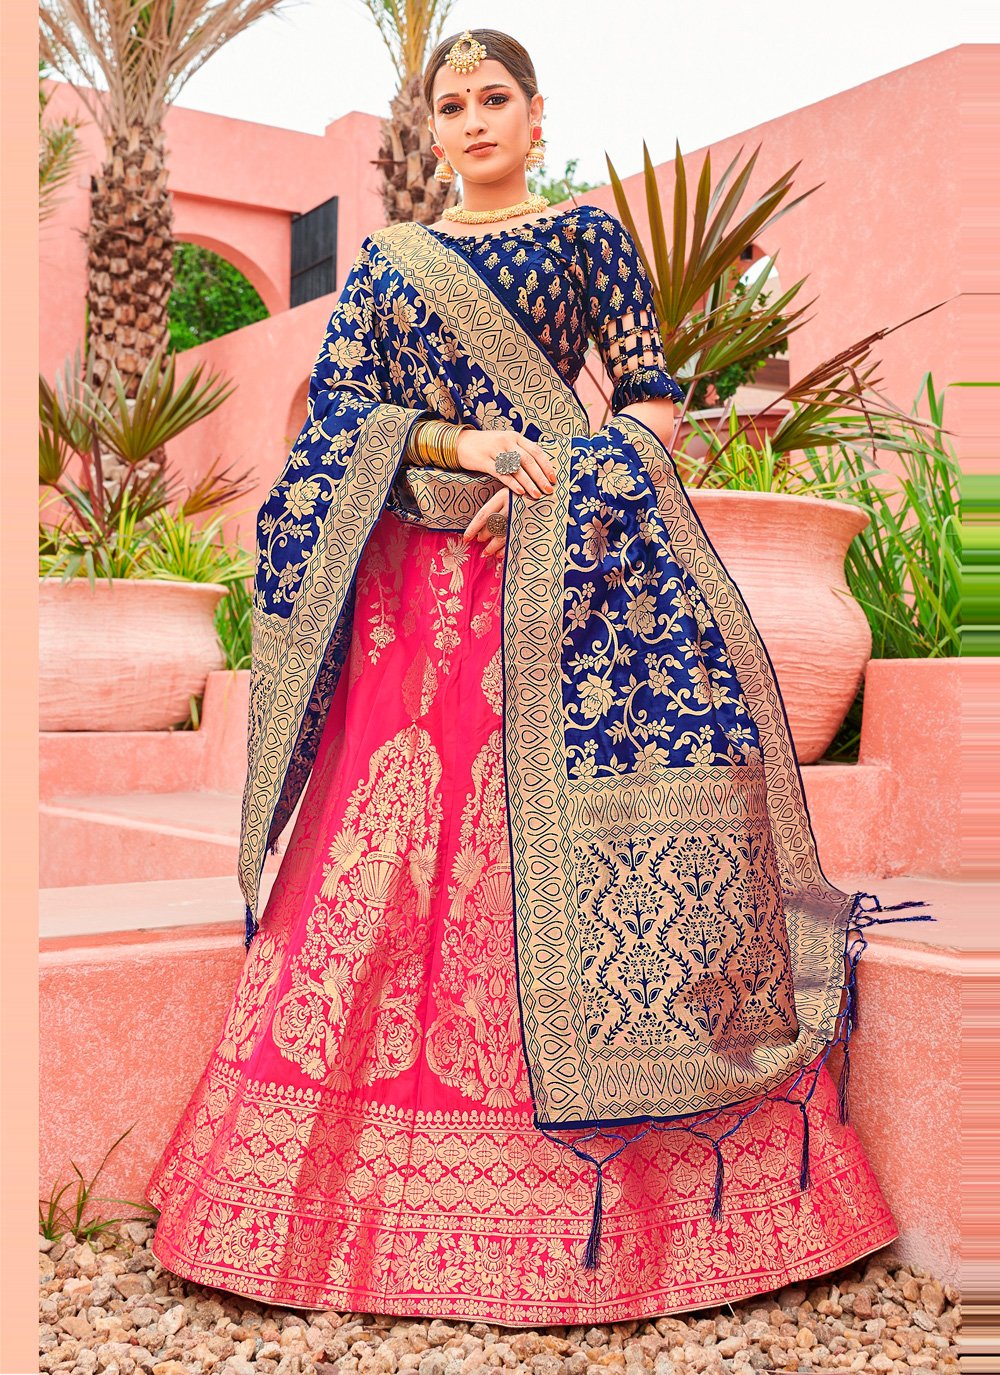 Buy LEHENGA CHOLI- PINK LEHENGA CHOLI WITH DUPATTA- Introducing our  exquisite Silk Pink Lehenga with a Navy Blue Design Touch, perfect for a  bride-to-be on her special day. at Amazon.in